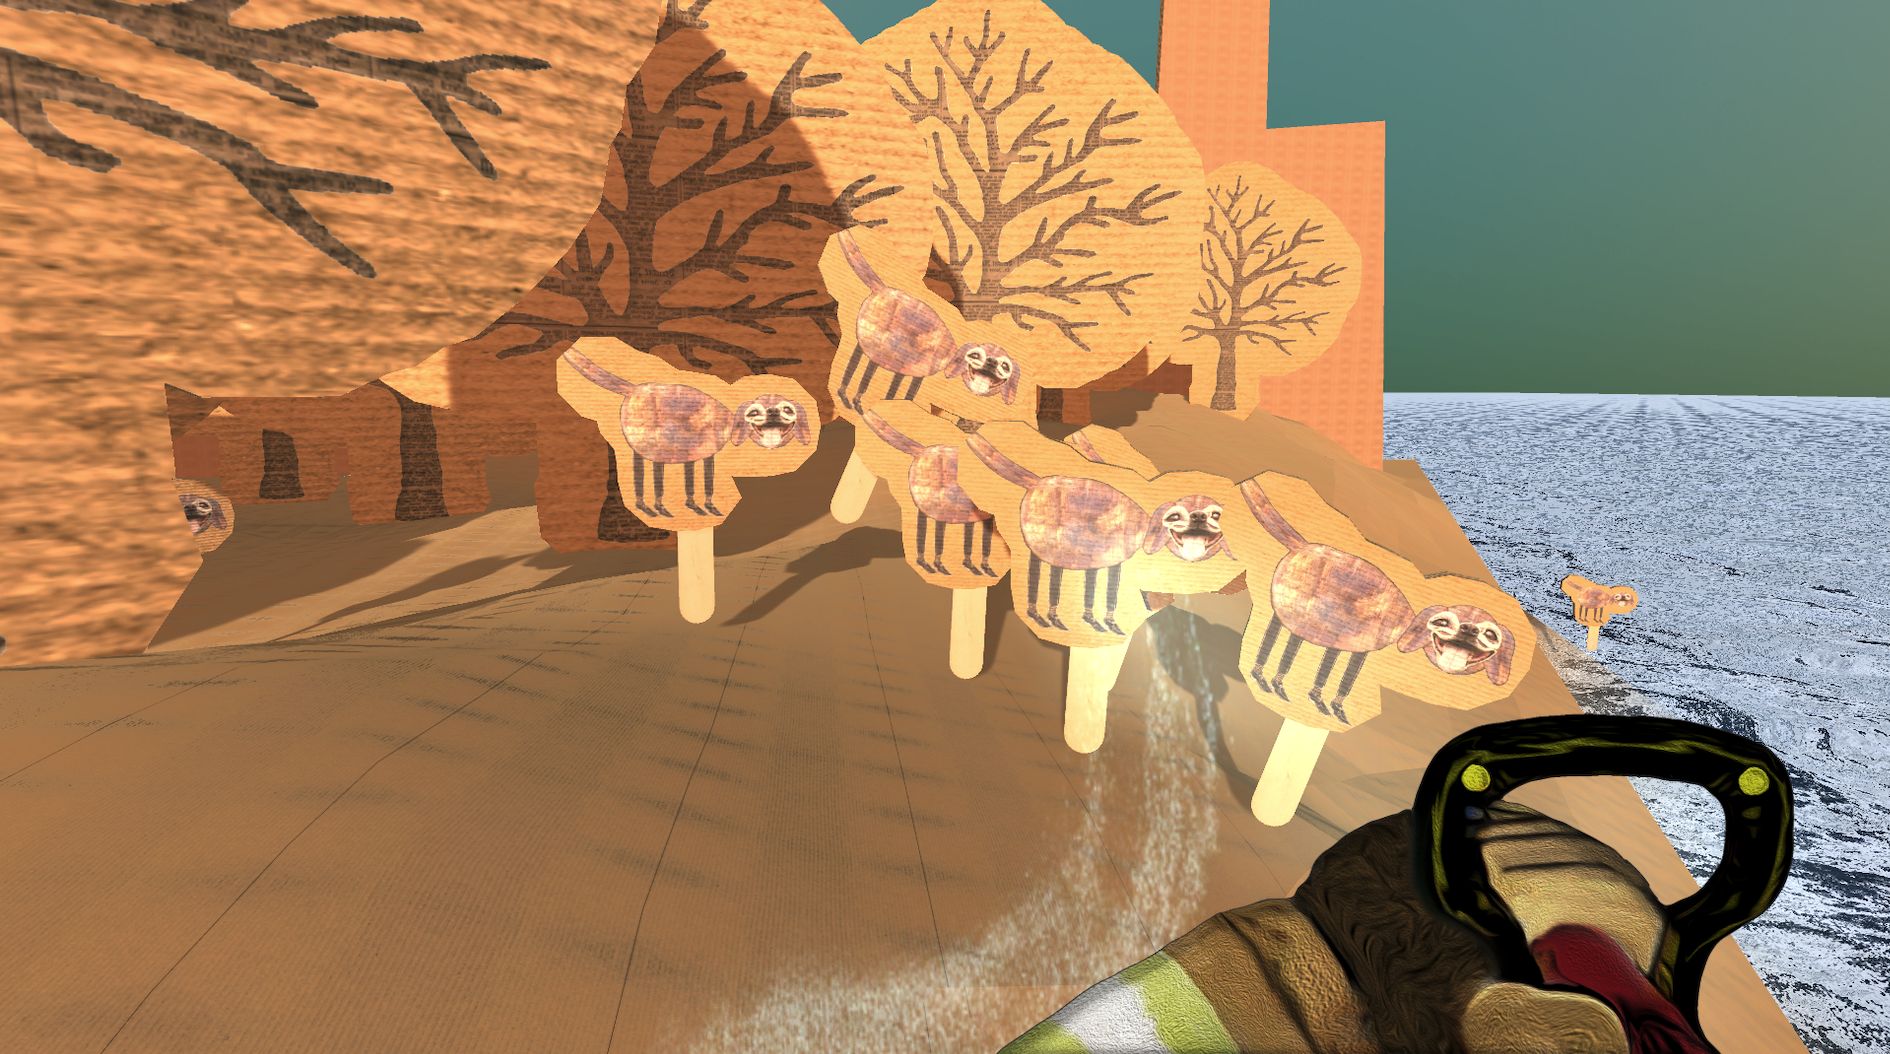 A screenshot of the game whre you can see a bunch of cardboard trees with cardboard animals between them.